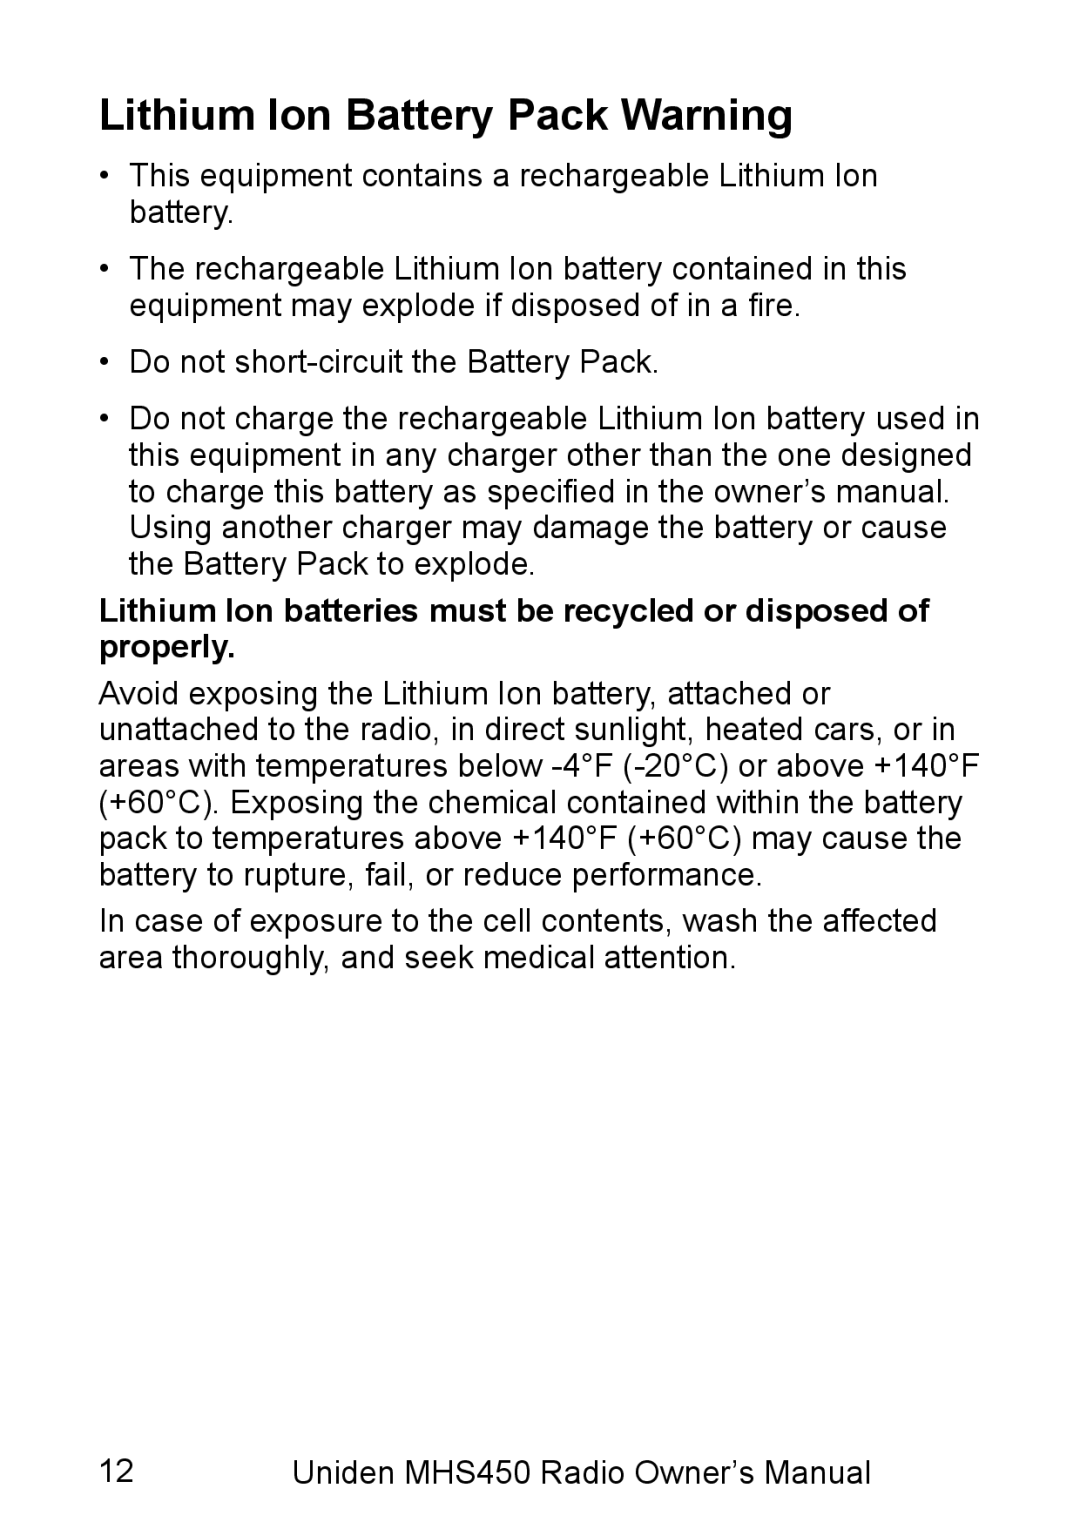 Uniden MHS450 owner manual Lithium Ion Battery Pack Warning 